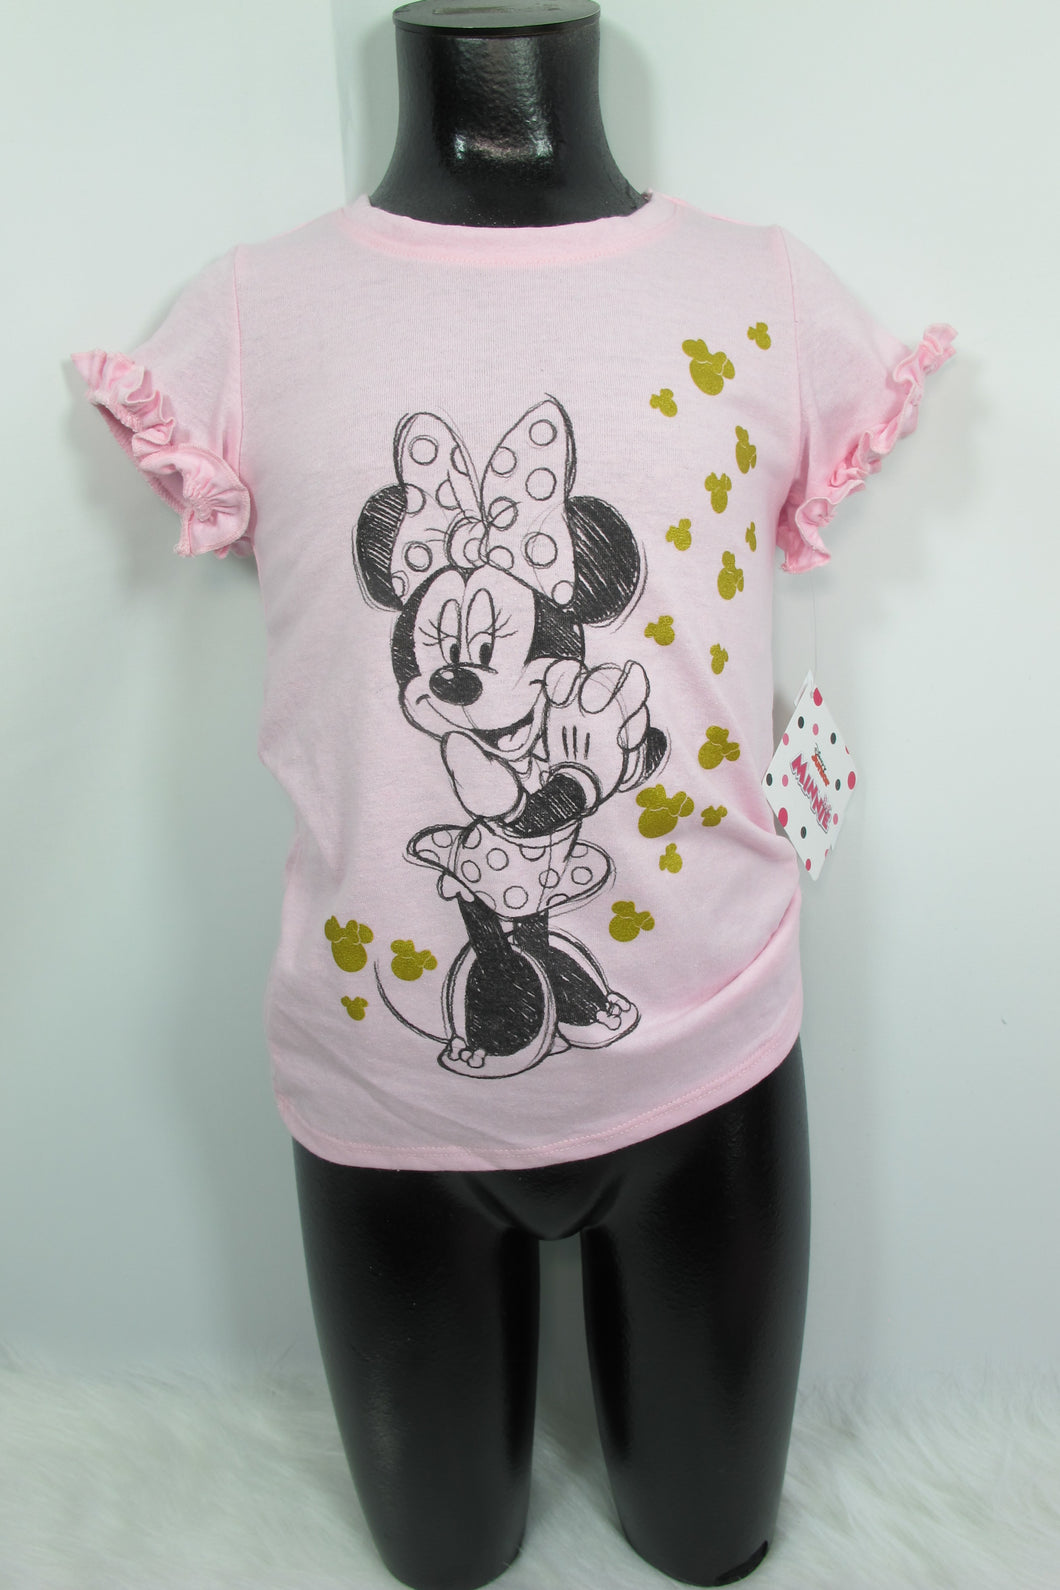 Little Girl's Pink Minnie Mouse Top